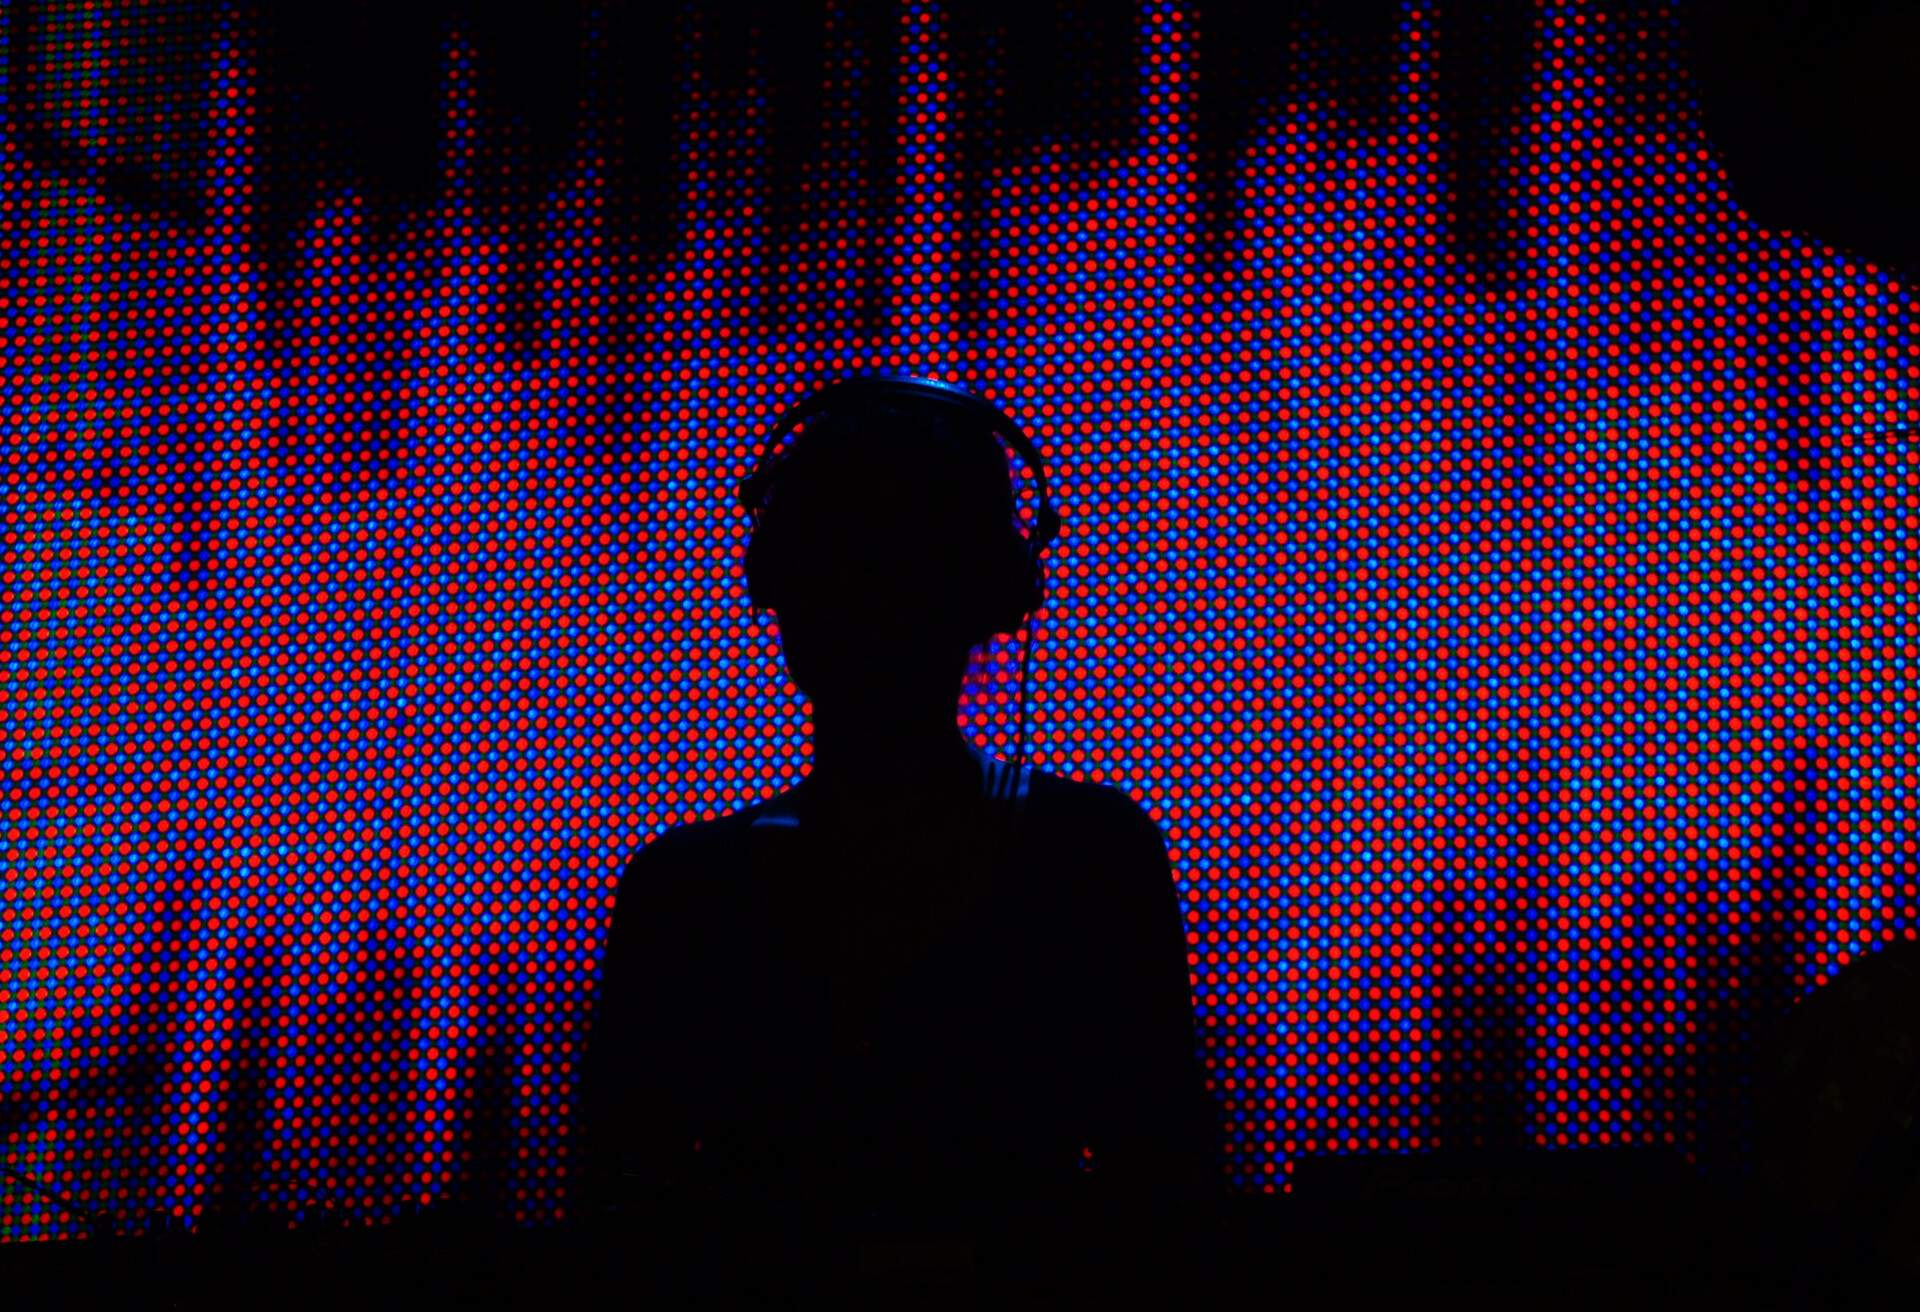 A DJ's silhouette against a neon background in a nightclub.